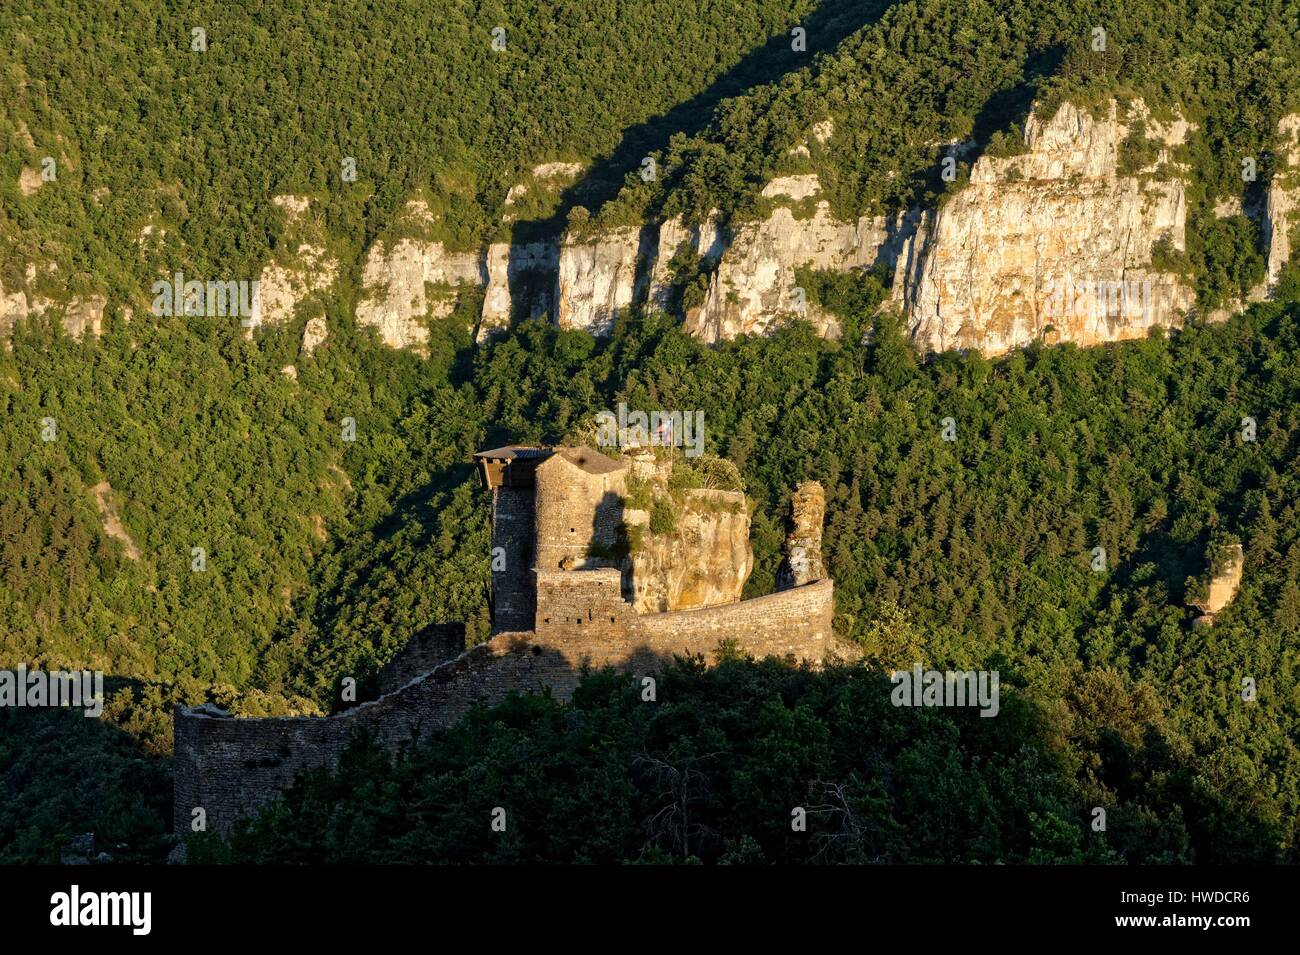 France, Aveyron, Riviere sur Tarn, Peyrelade castel of the 11th century dominating the Gorges du Tarn Stock Photo